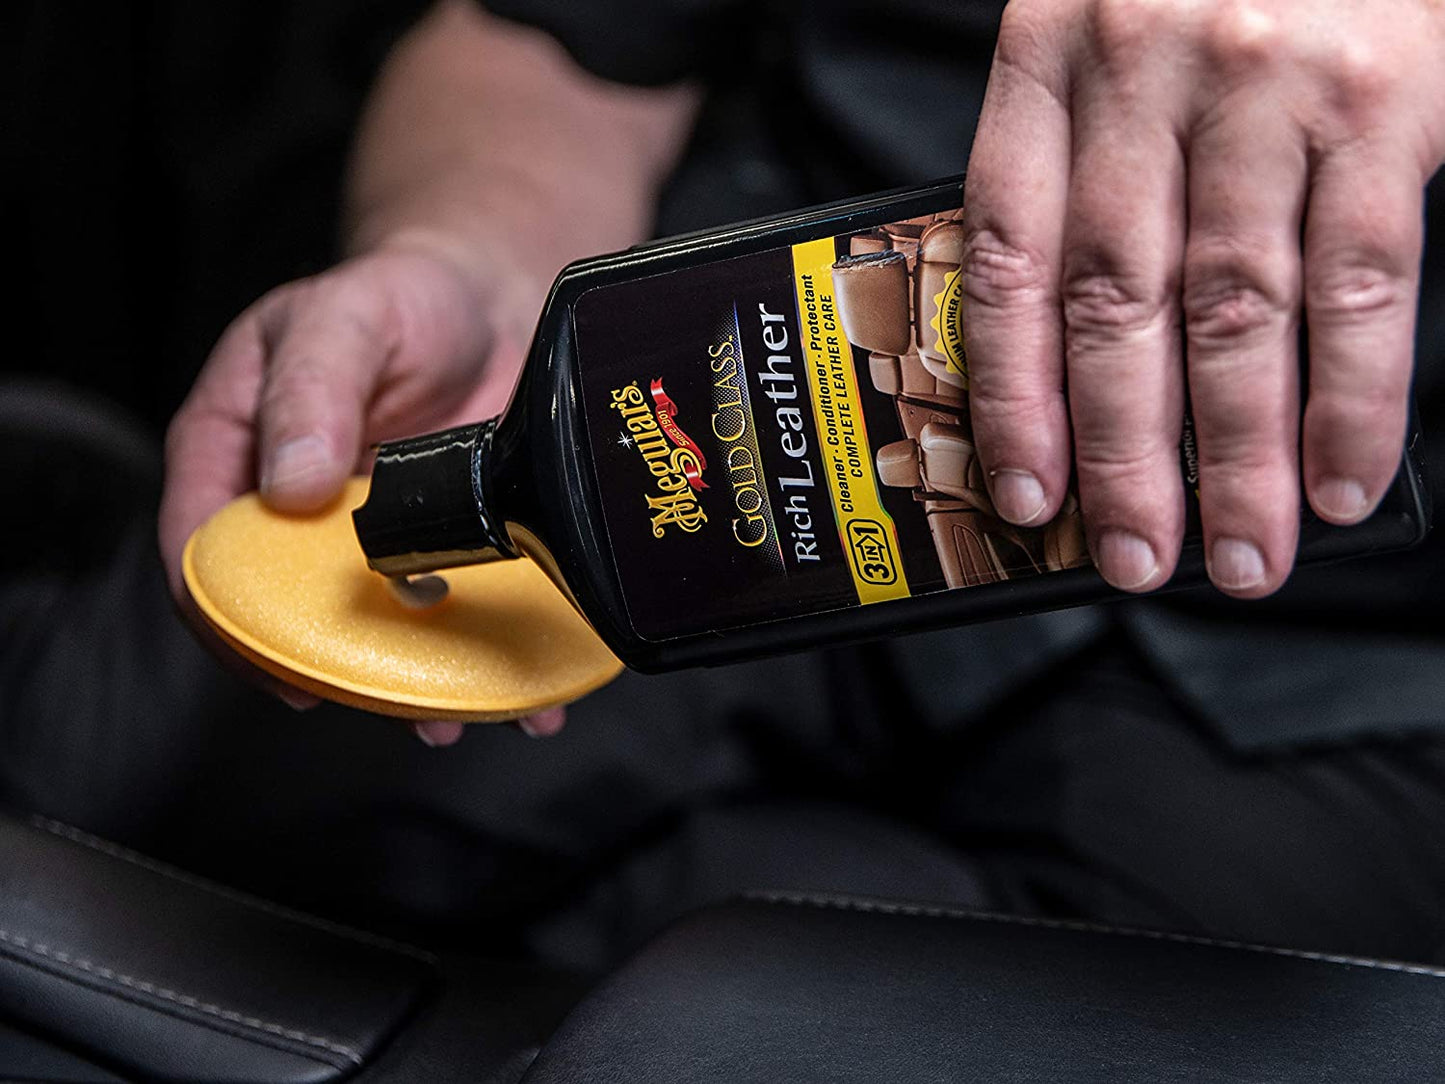 Meguiar's Gold Class Rich Leather Lotion – Cleans, Conditions & Protects for Complete Care – G7214, 14 oz